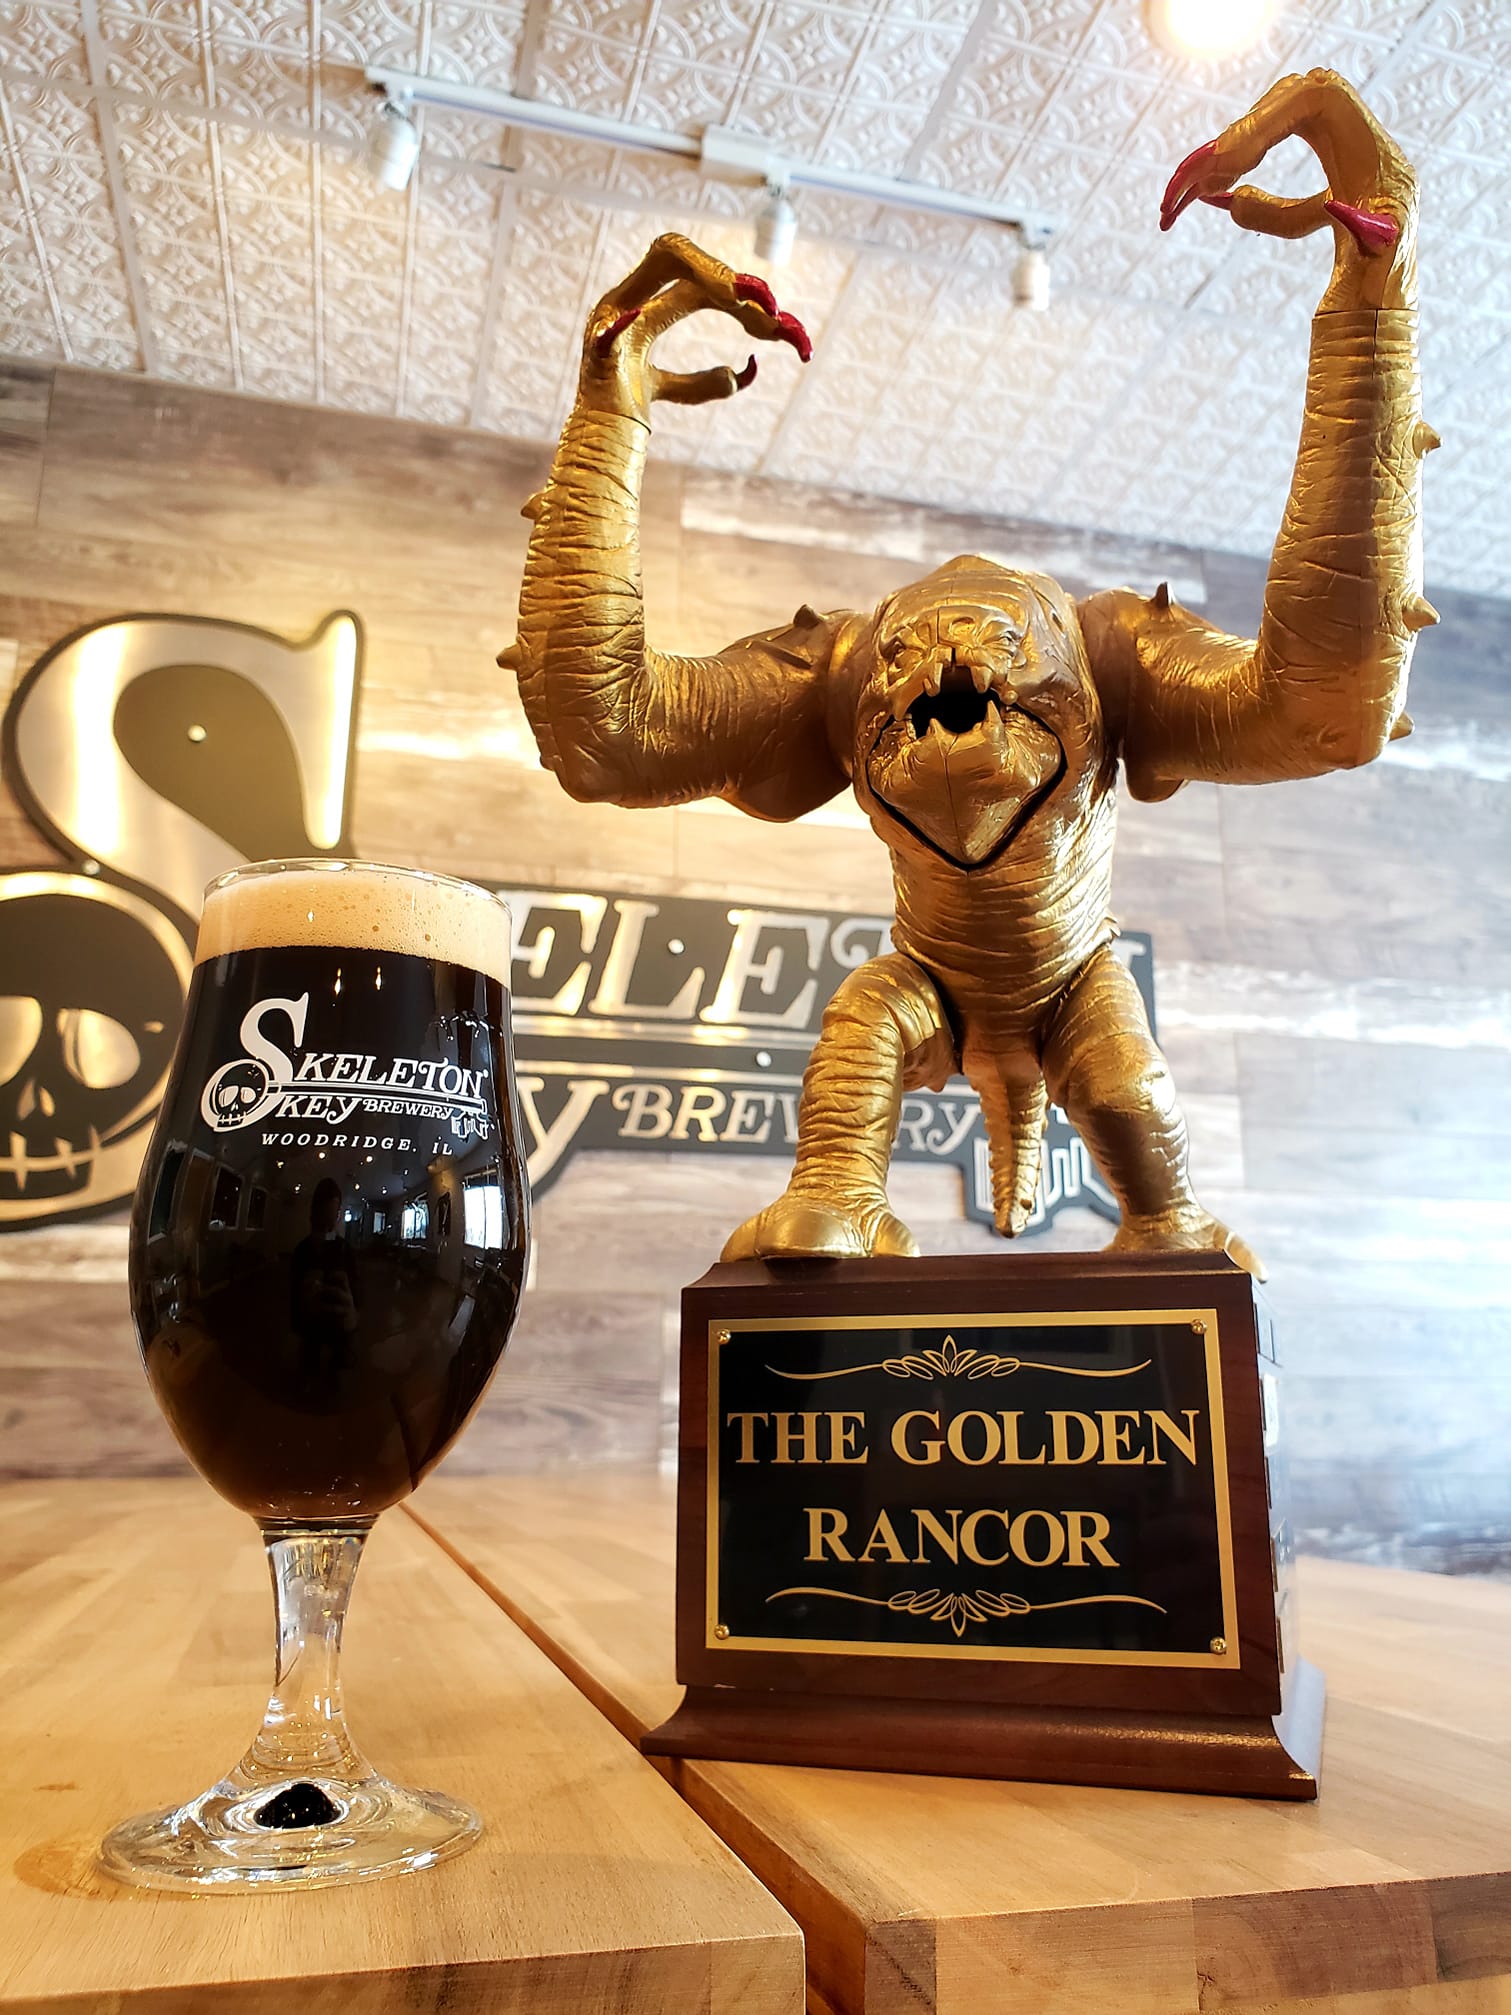 Glass of Plan for Everything from Skeleton Key Brewery next to the Golden Rancor trophy